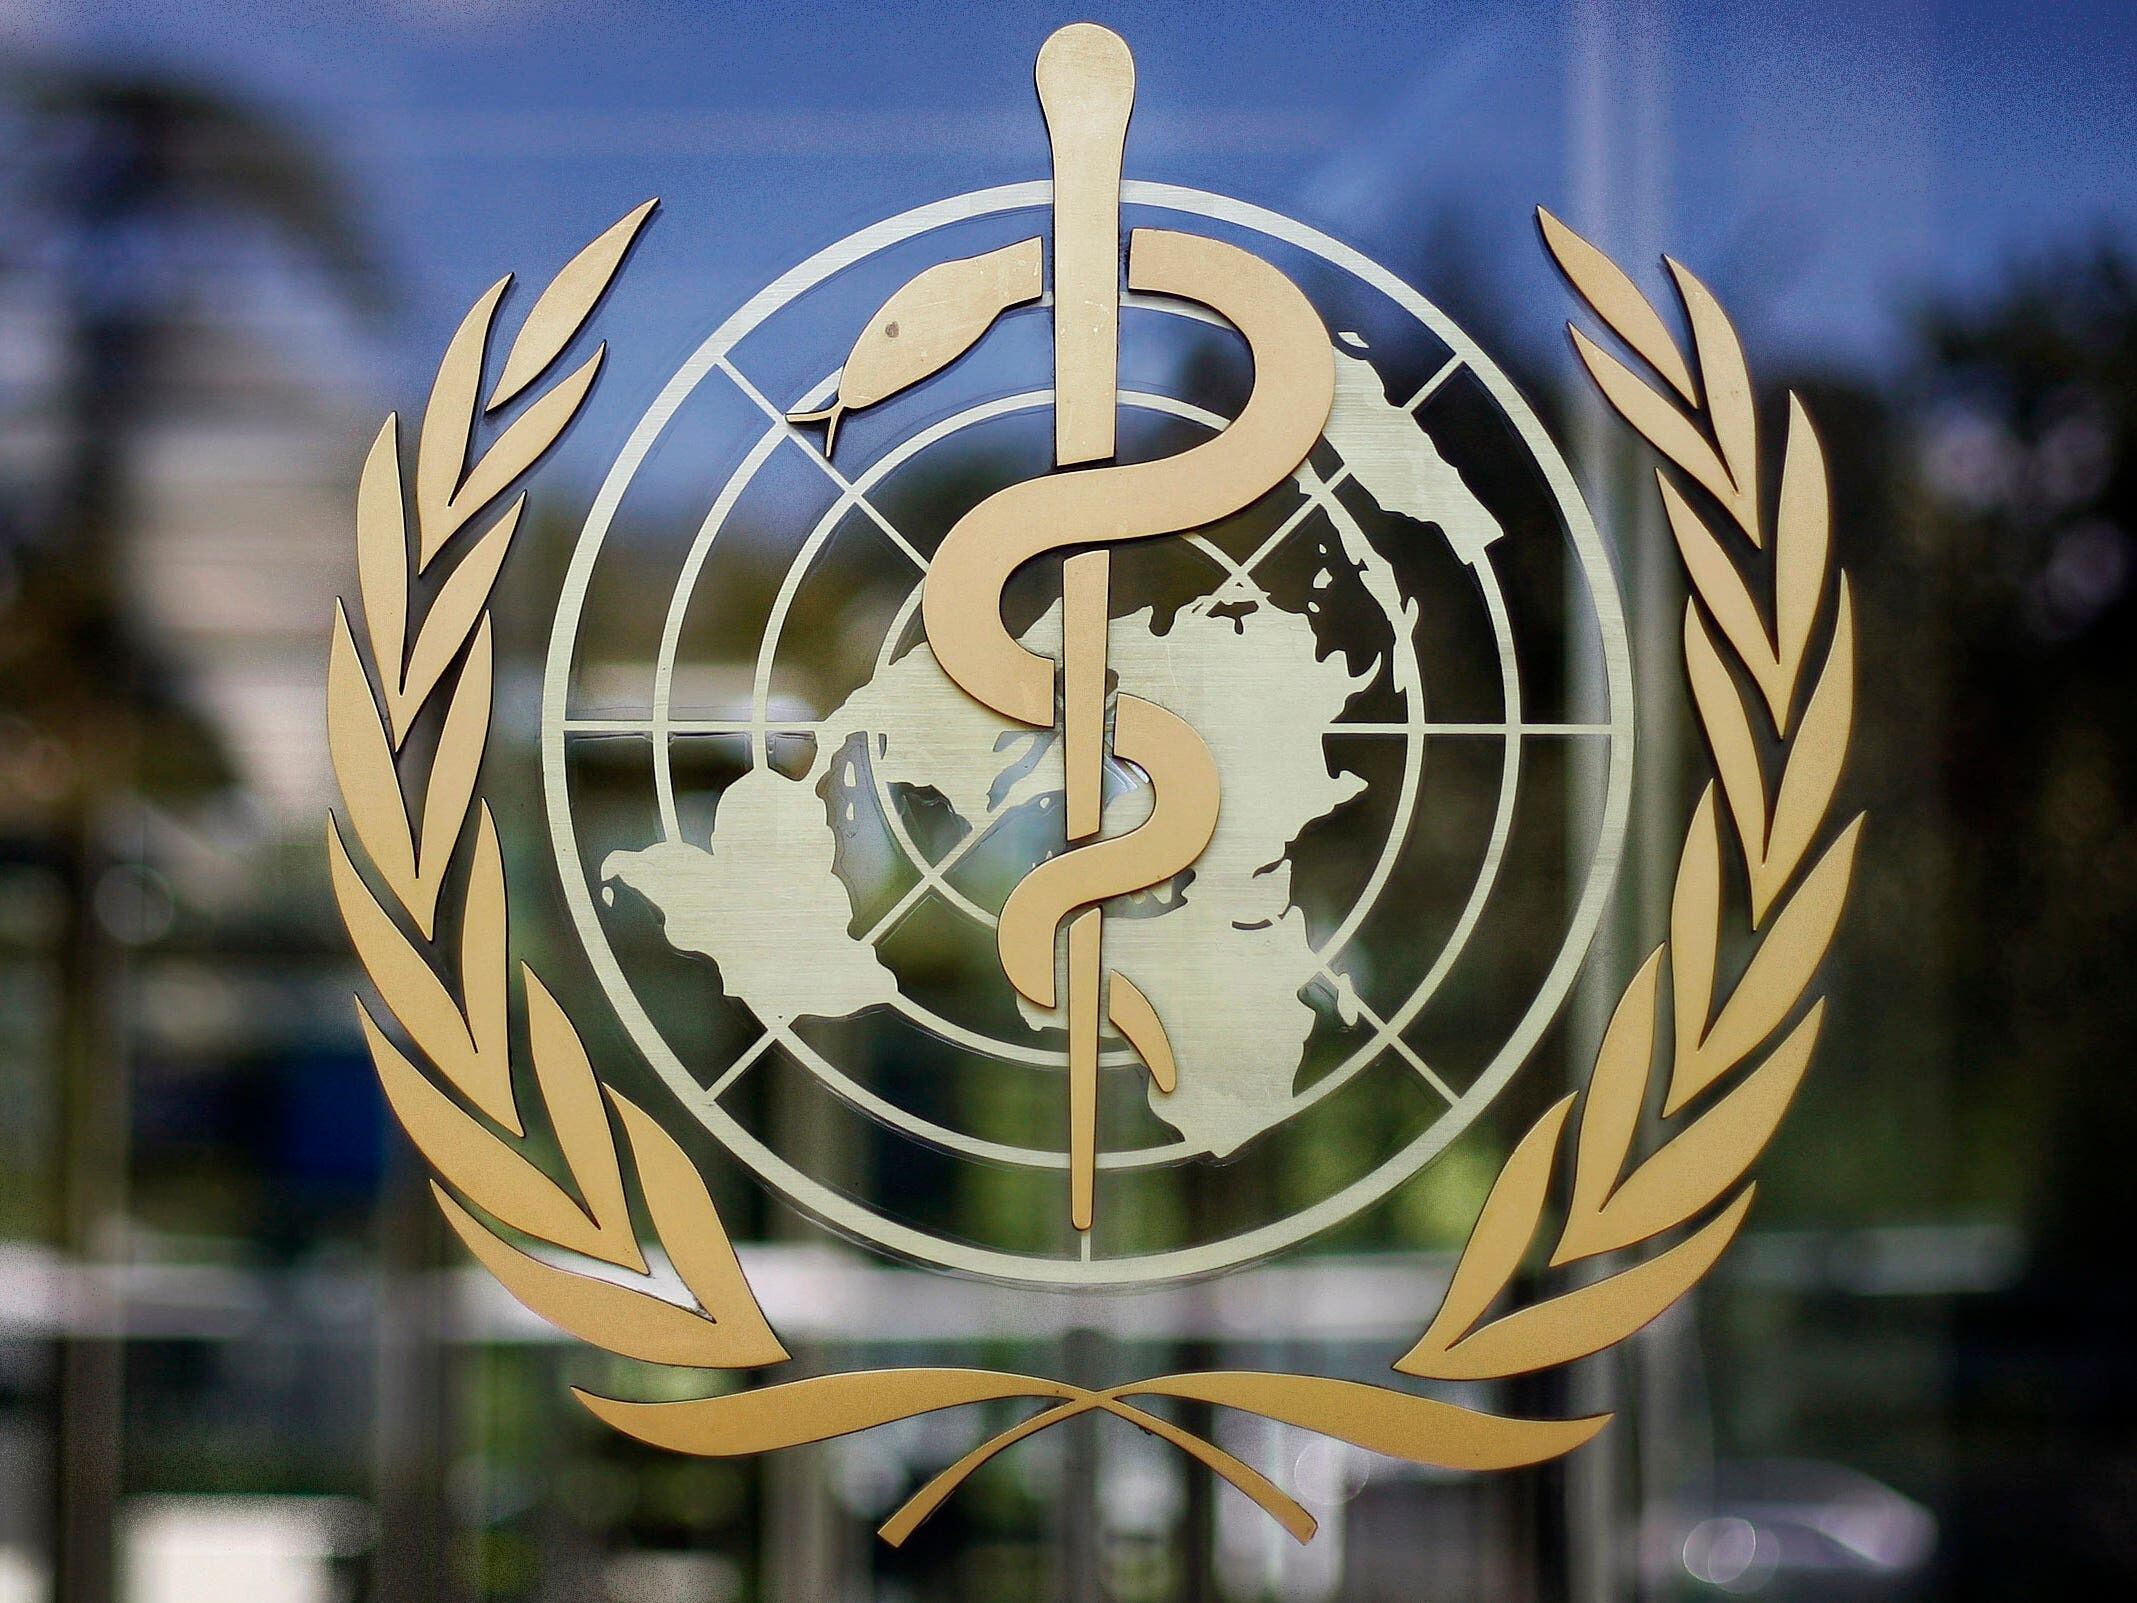 Efforts to draft pandemic treaty falter as countries disagree on future response